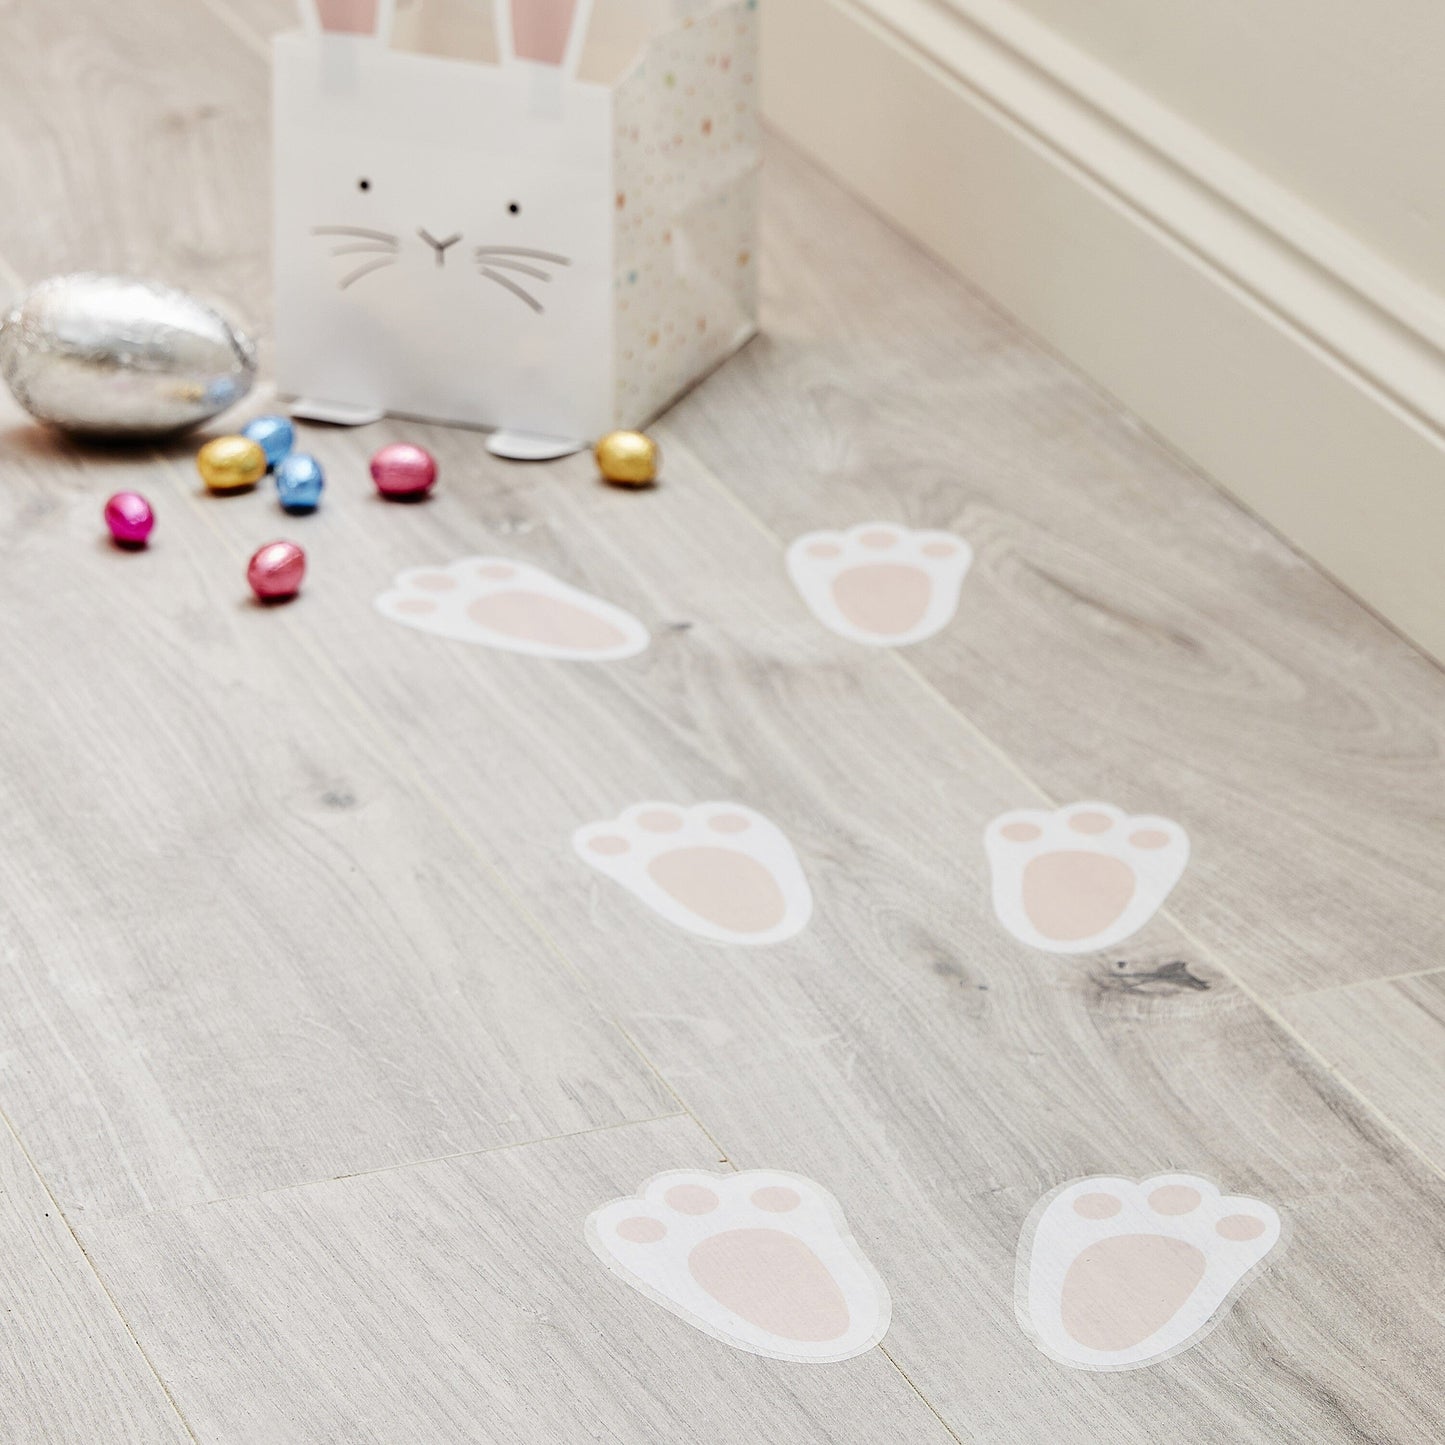 Easter Bunny Feet Floor Stickers | Easter Morning Ideas Ginger Ray